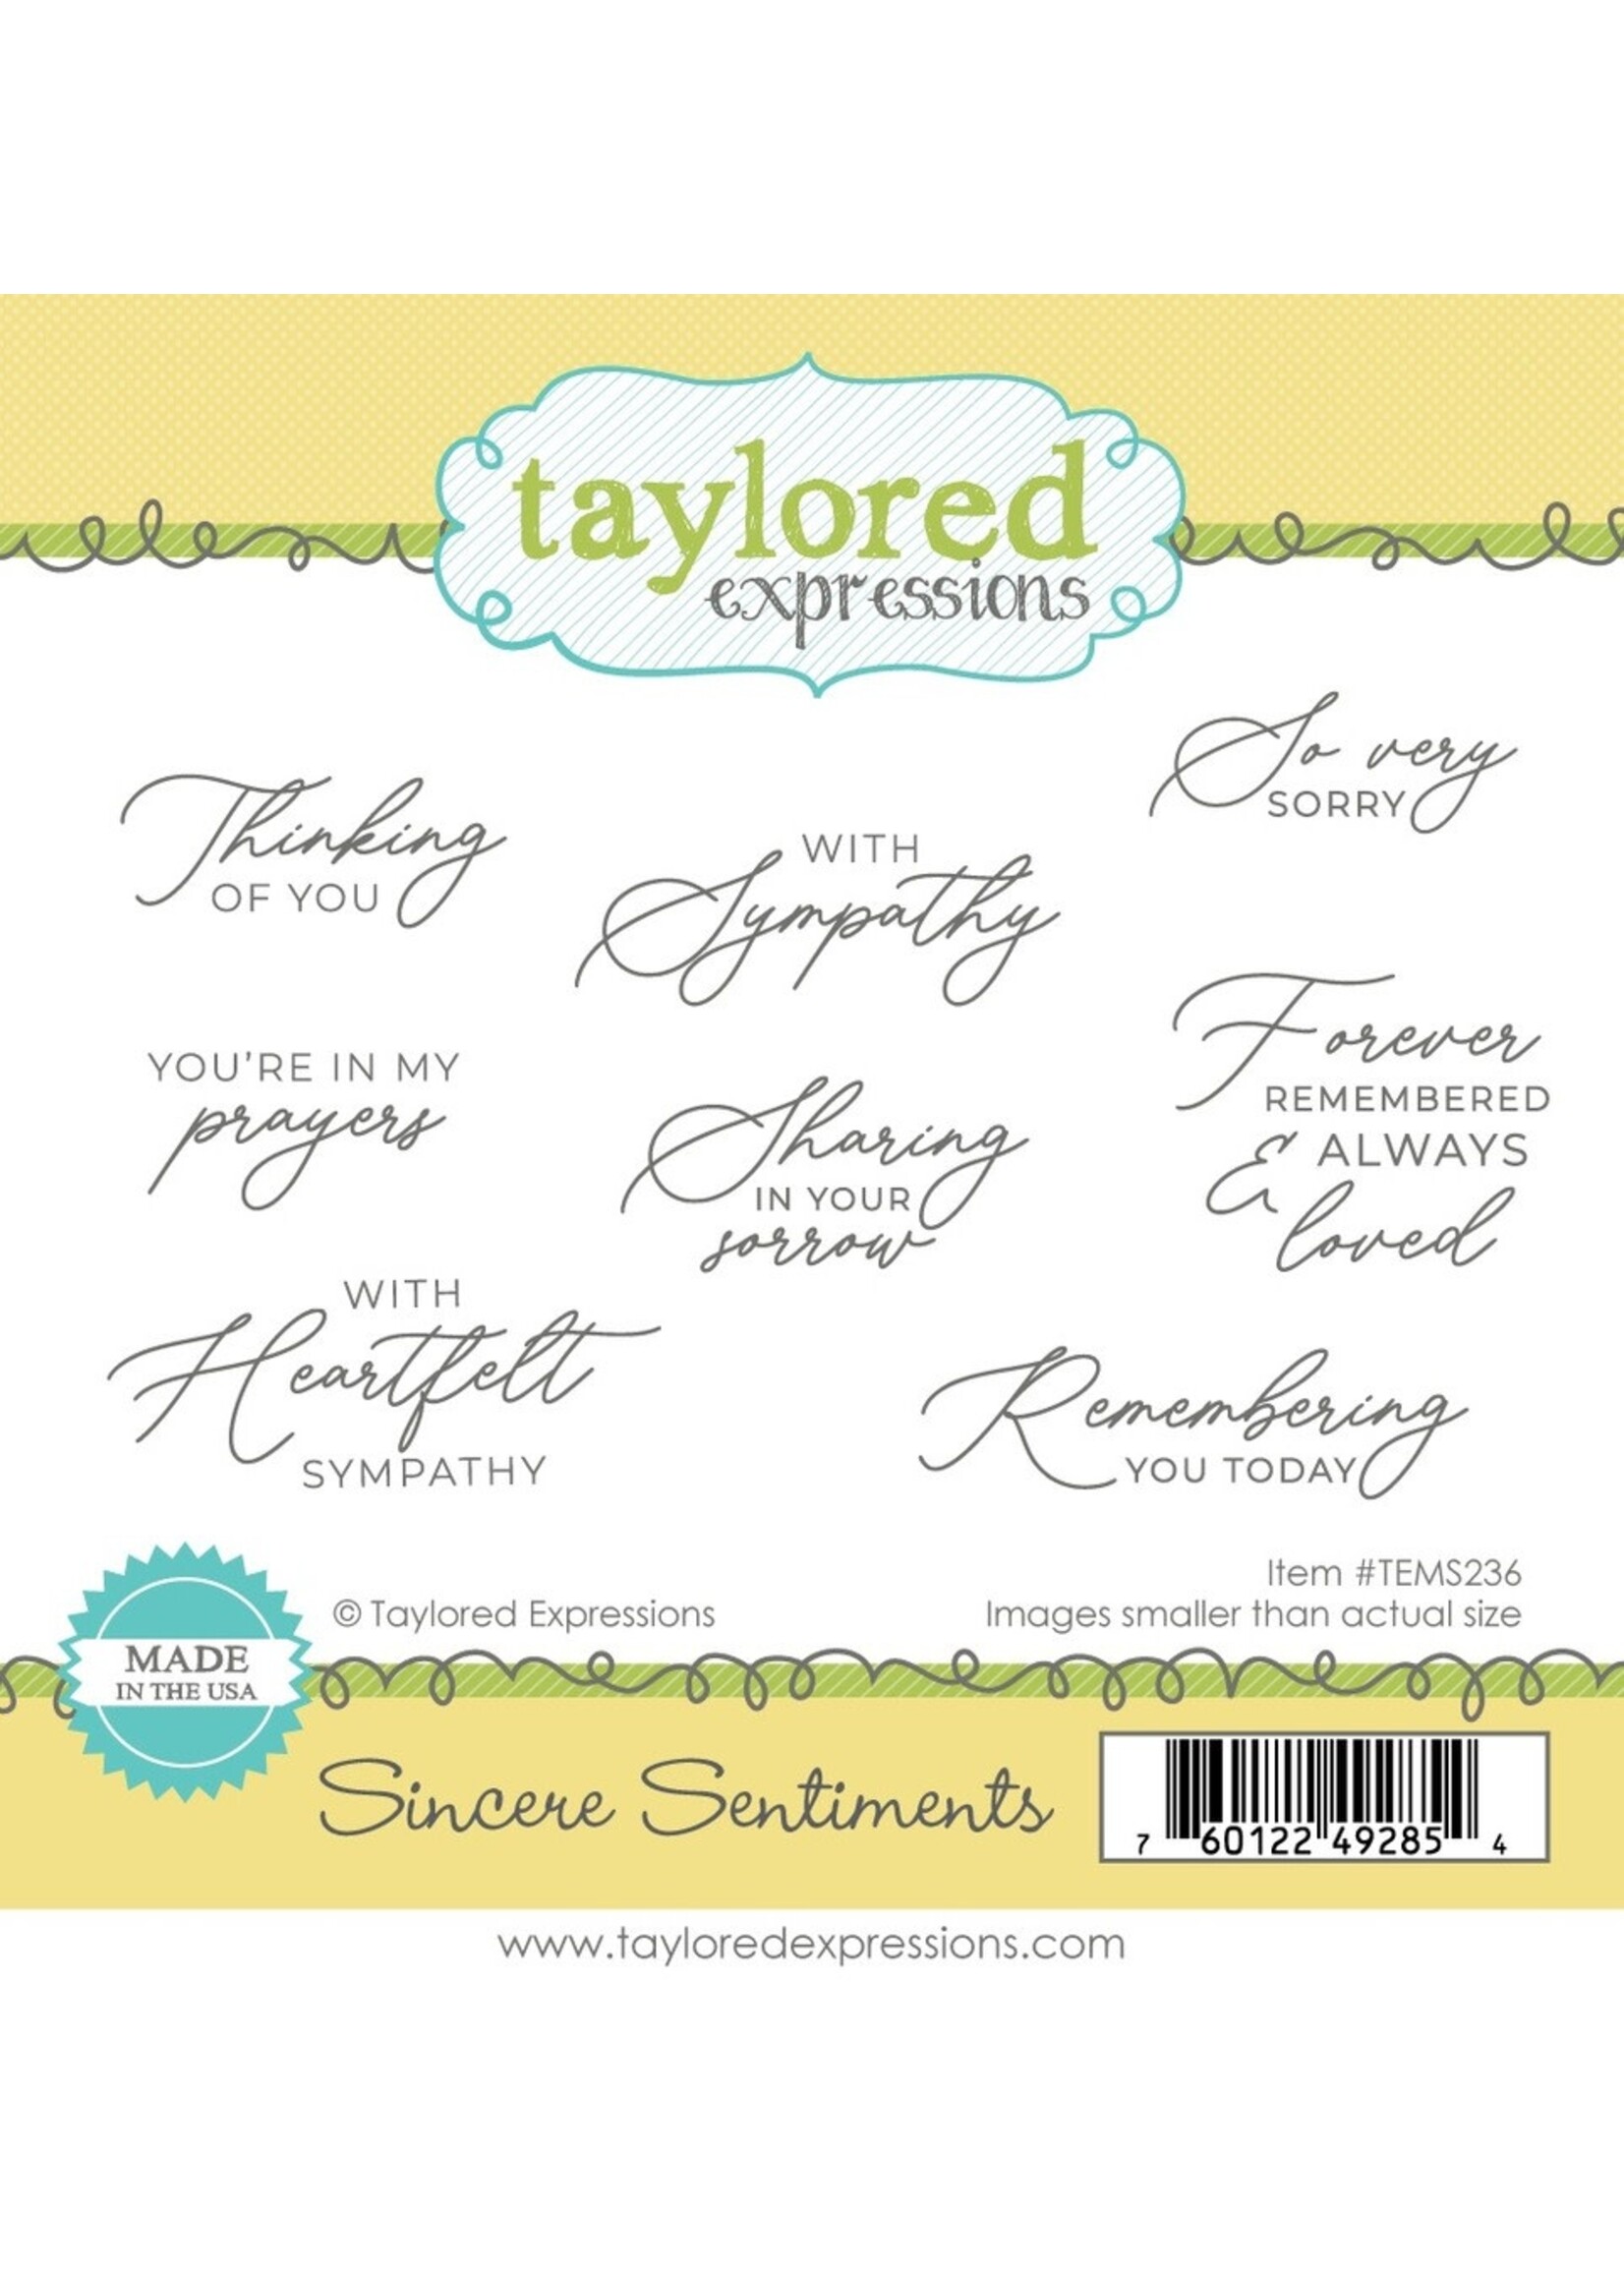 TAYLORED EXPRESSIONS Sincere Sentiments